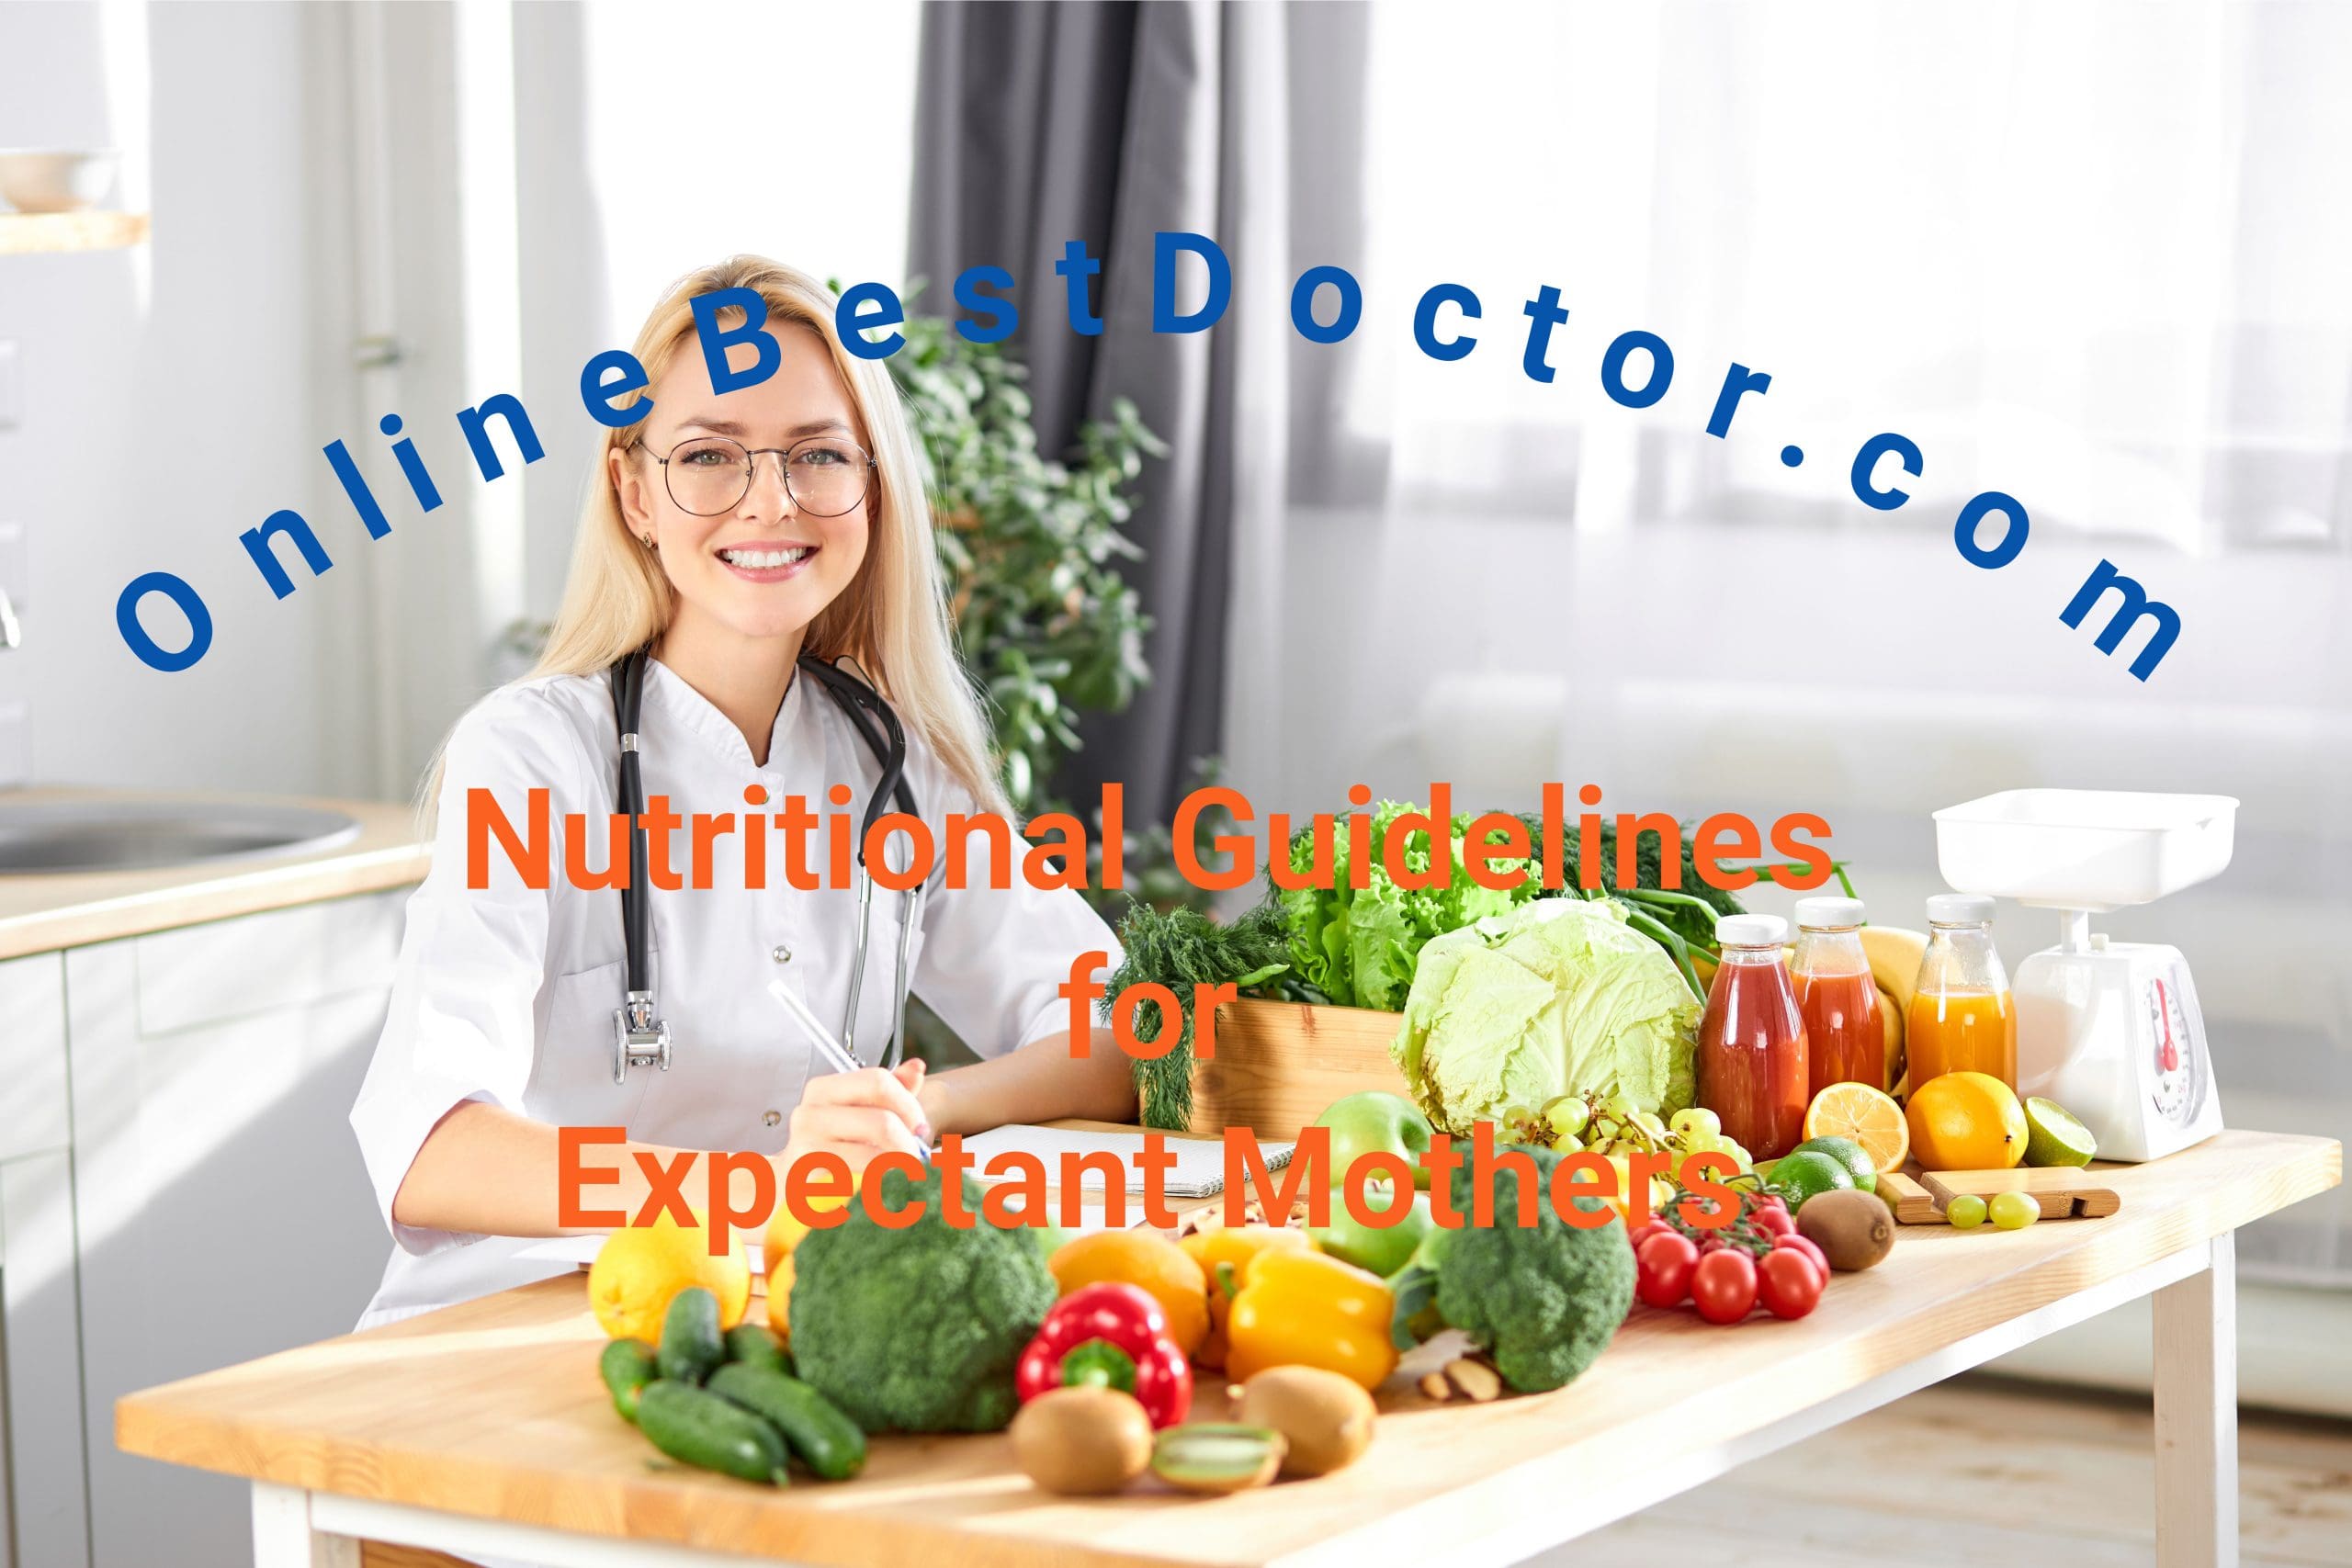 Nutritional Guidelines for Expectant Mothers